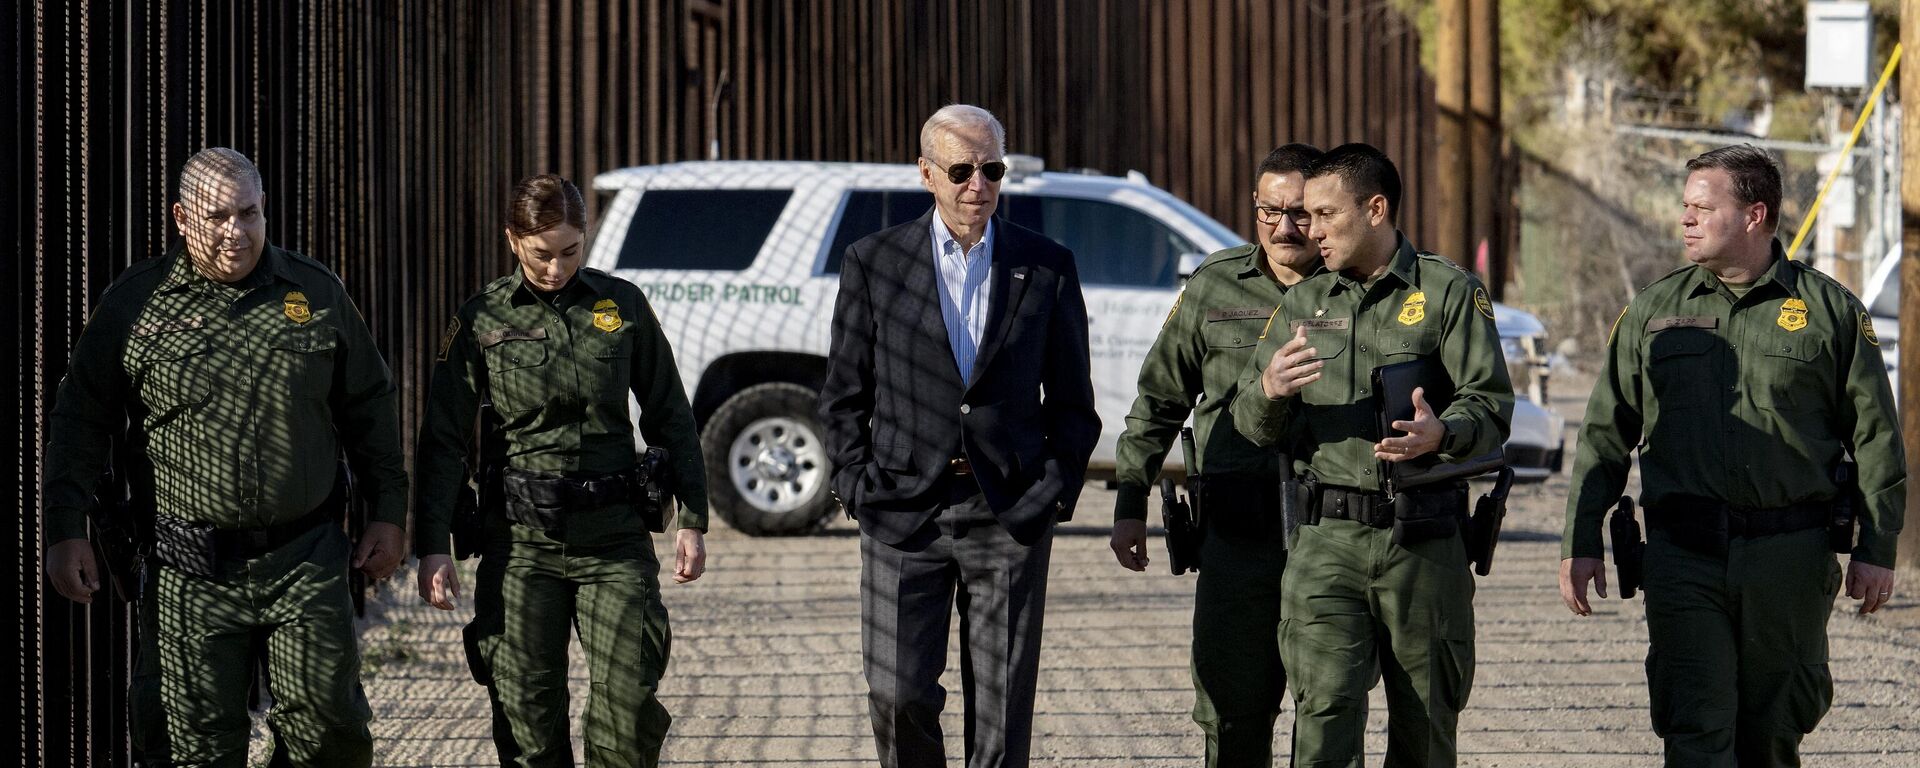 US President Joe Biden speaks with US Customs and Border Protection officers as he visits the US-Mexico border in El Paso, Texas, on January 8, 2023 - Sputnik International, 1920, 08.01.2023